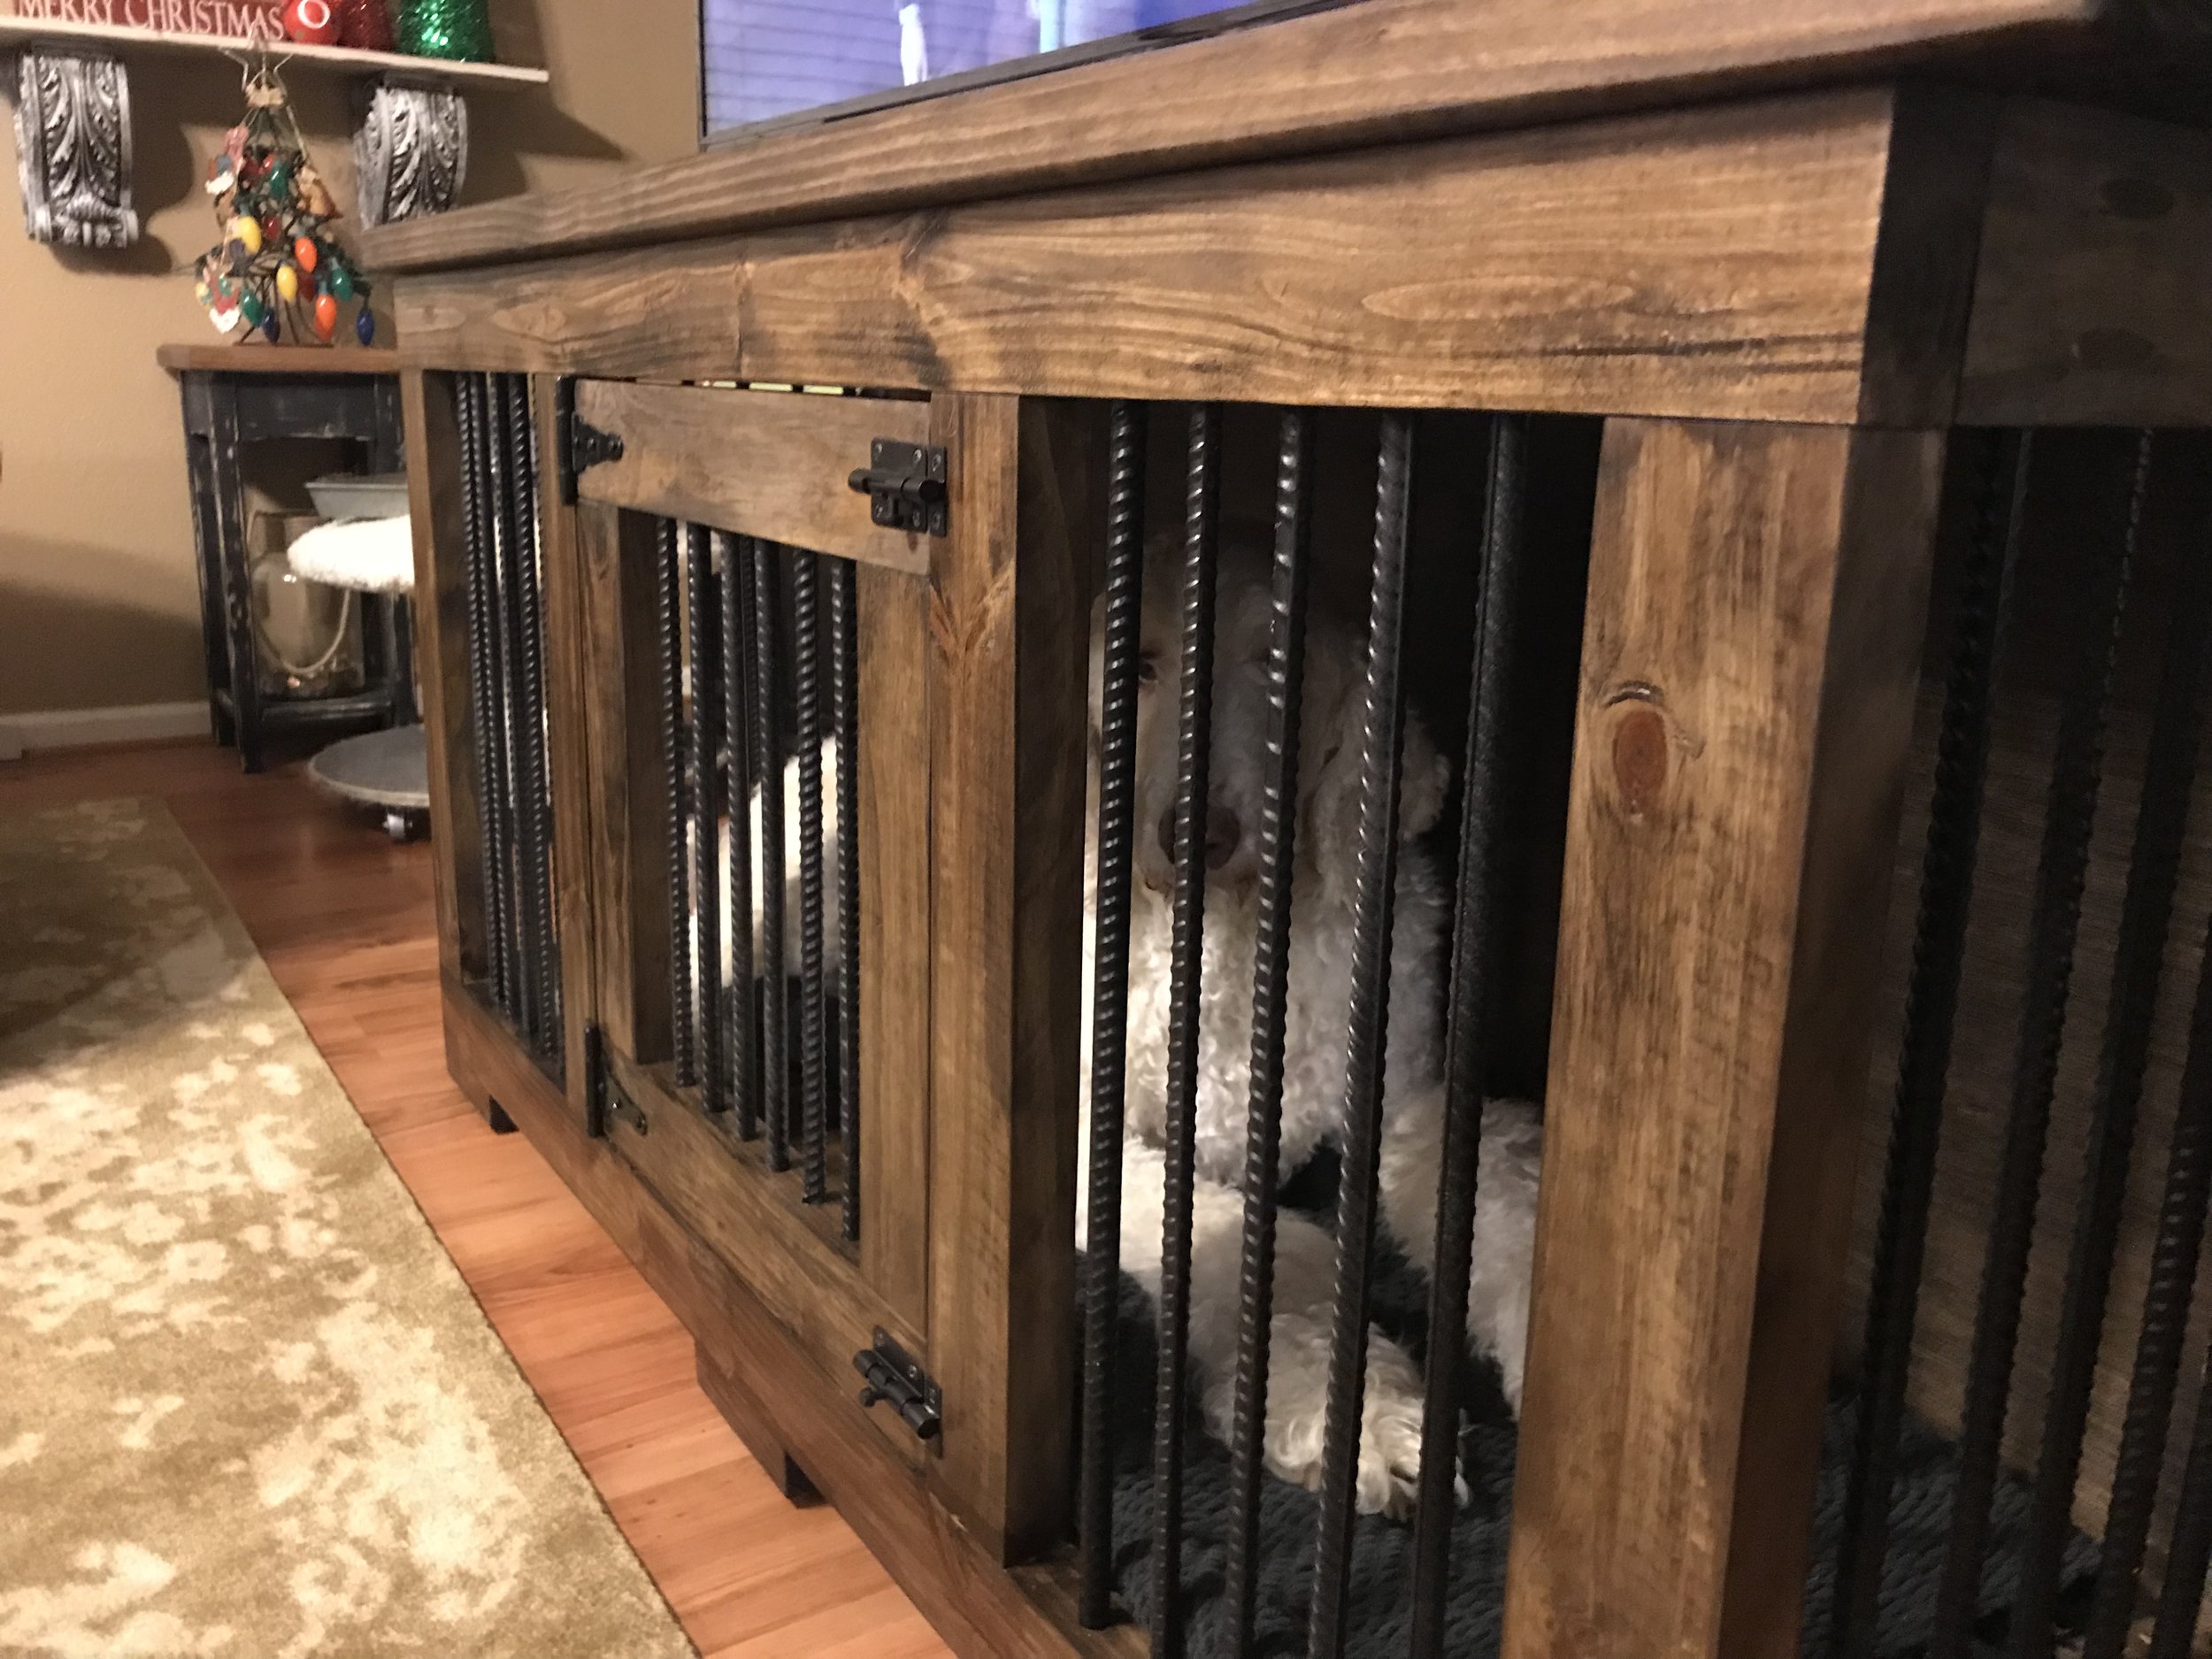 How To Build An Indoor Dog Kennel